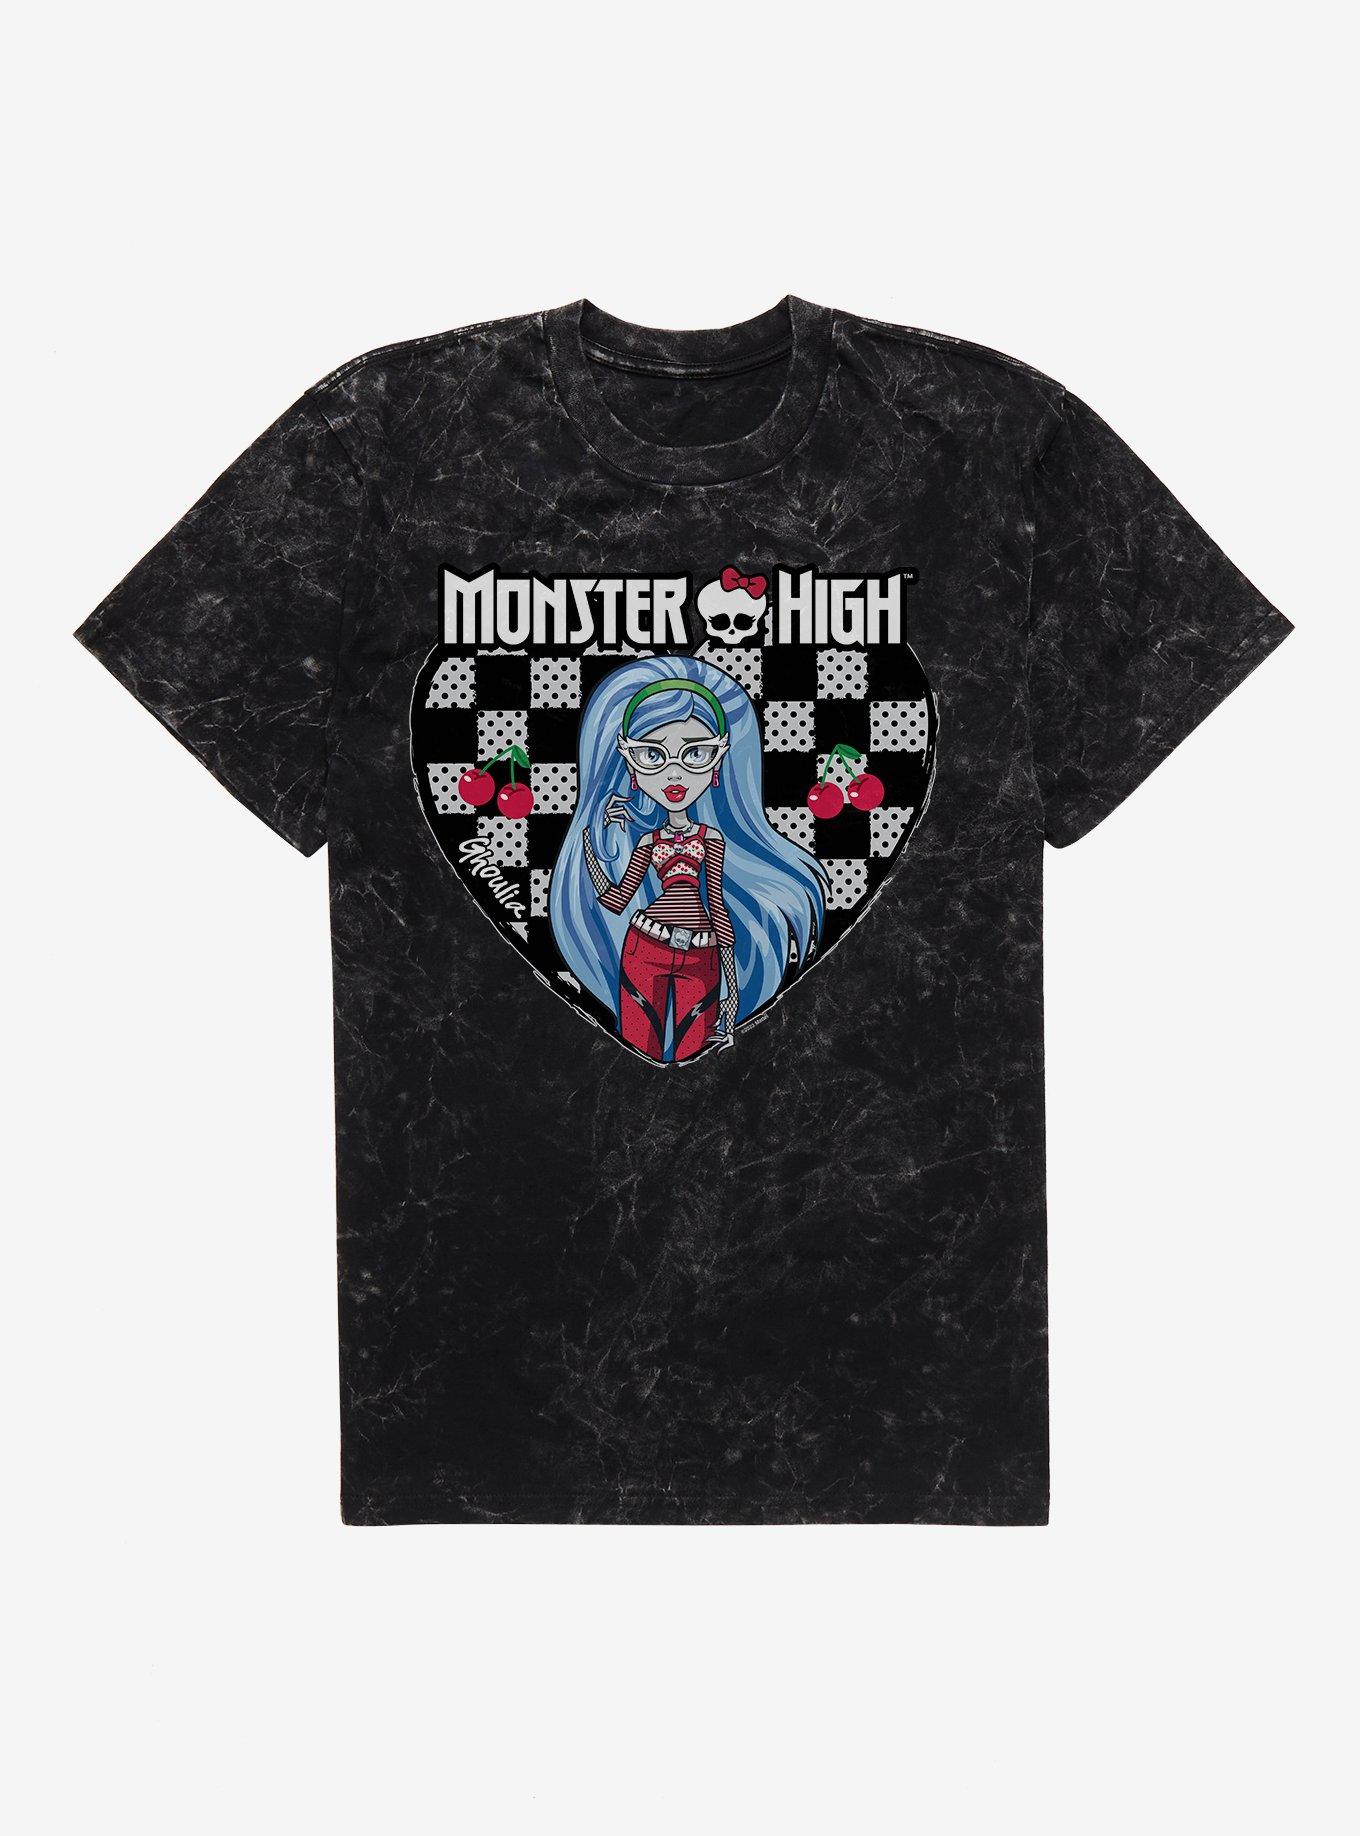 Monster High Ghoulia Yelps Checkerboard Heart Mineral Wash T-Shirt, BLACK MINERAL WASH, hi-res